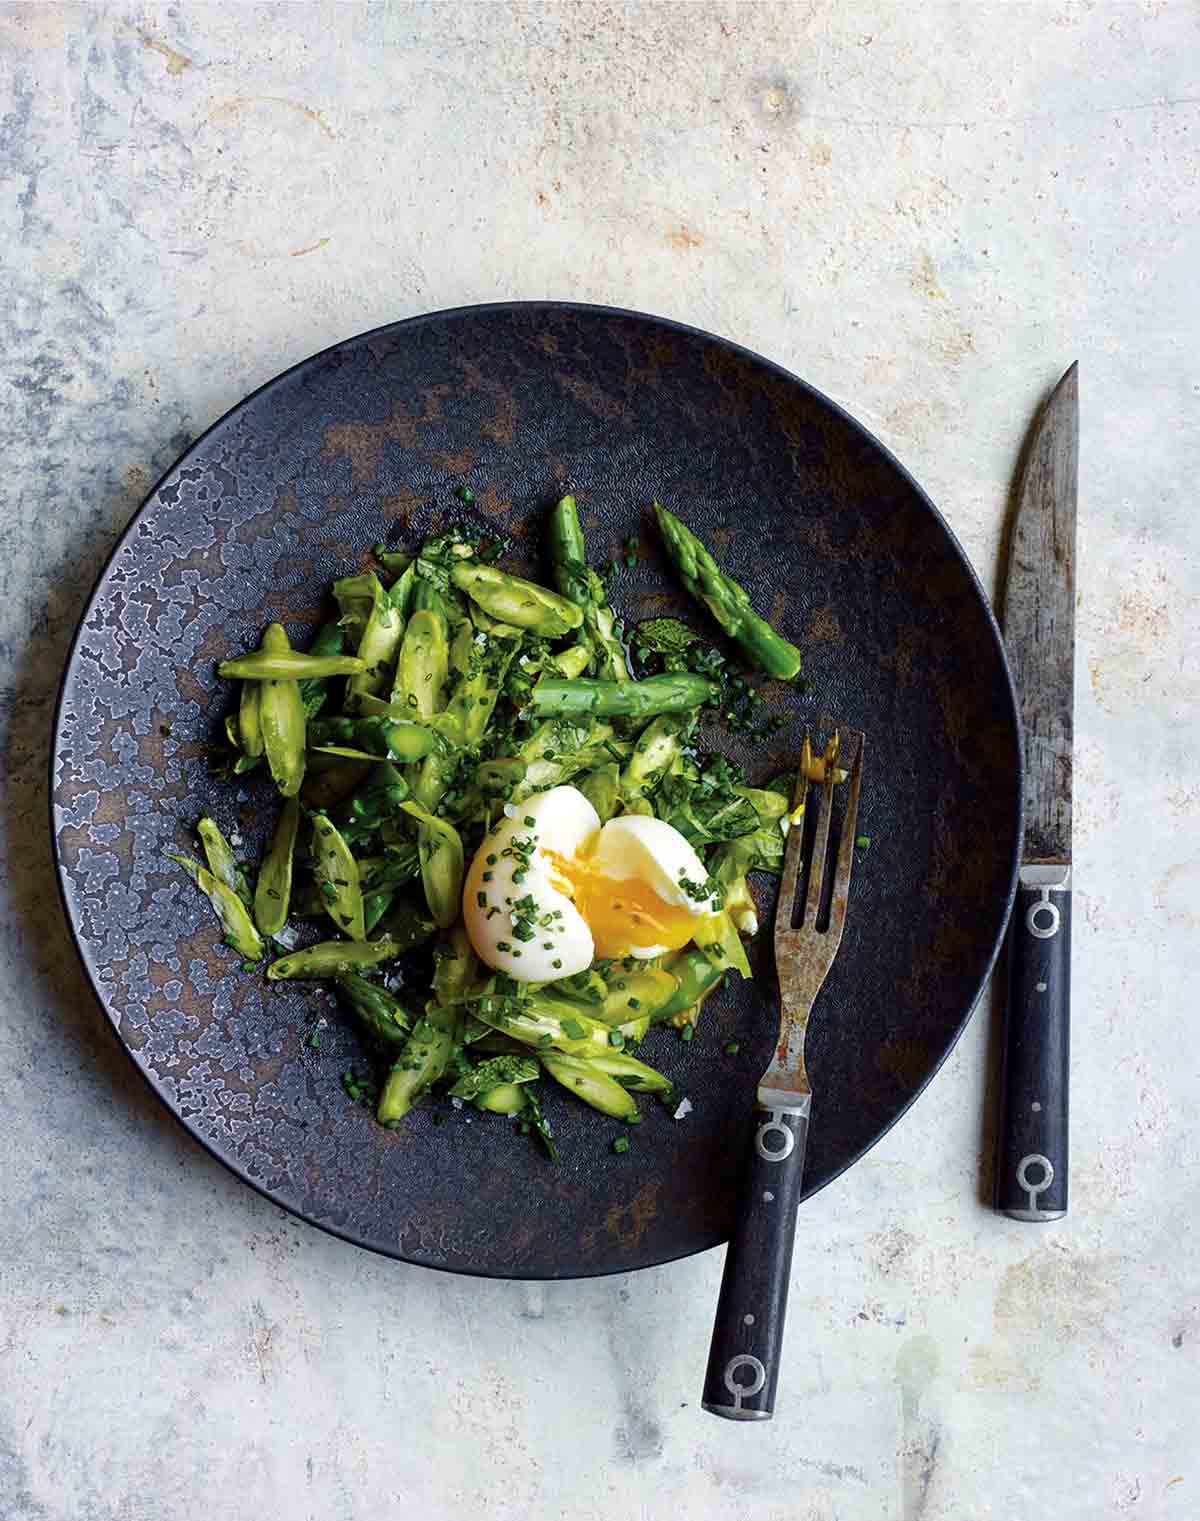 Asparagus and herb salad with chopped parsley, basil, tarragon, and mint and a broken soft boiled egg on a plate, fork and knife.